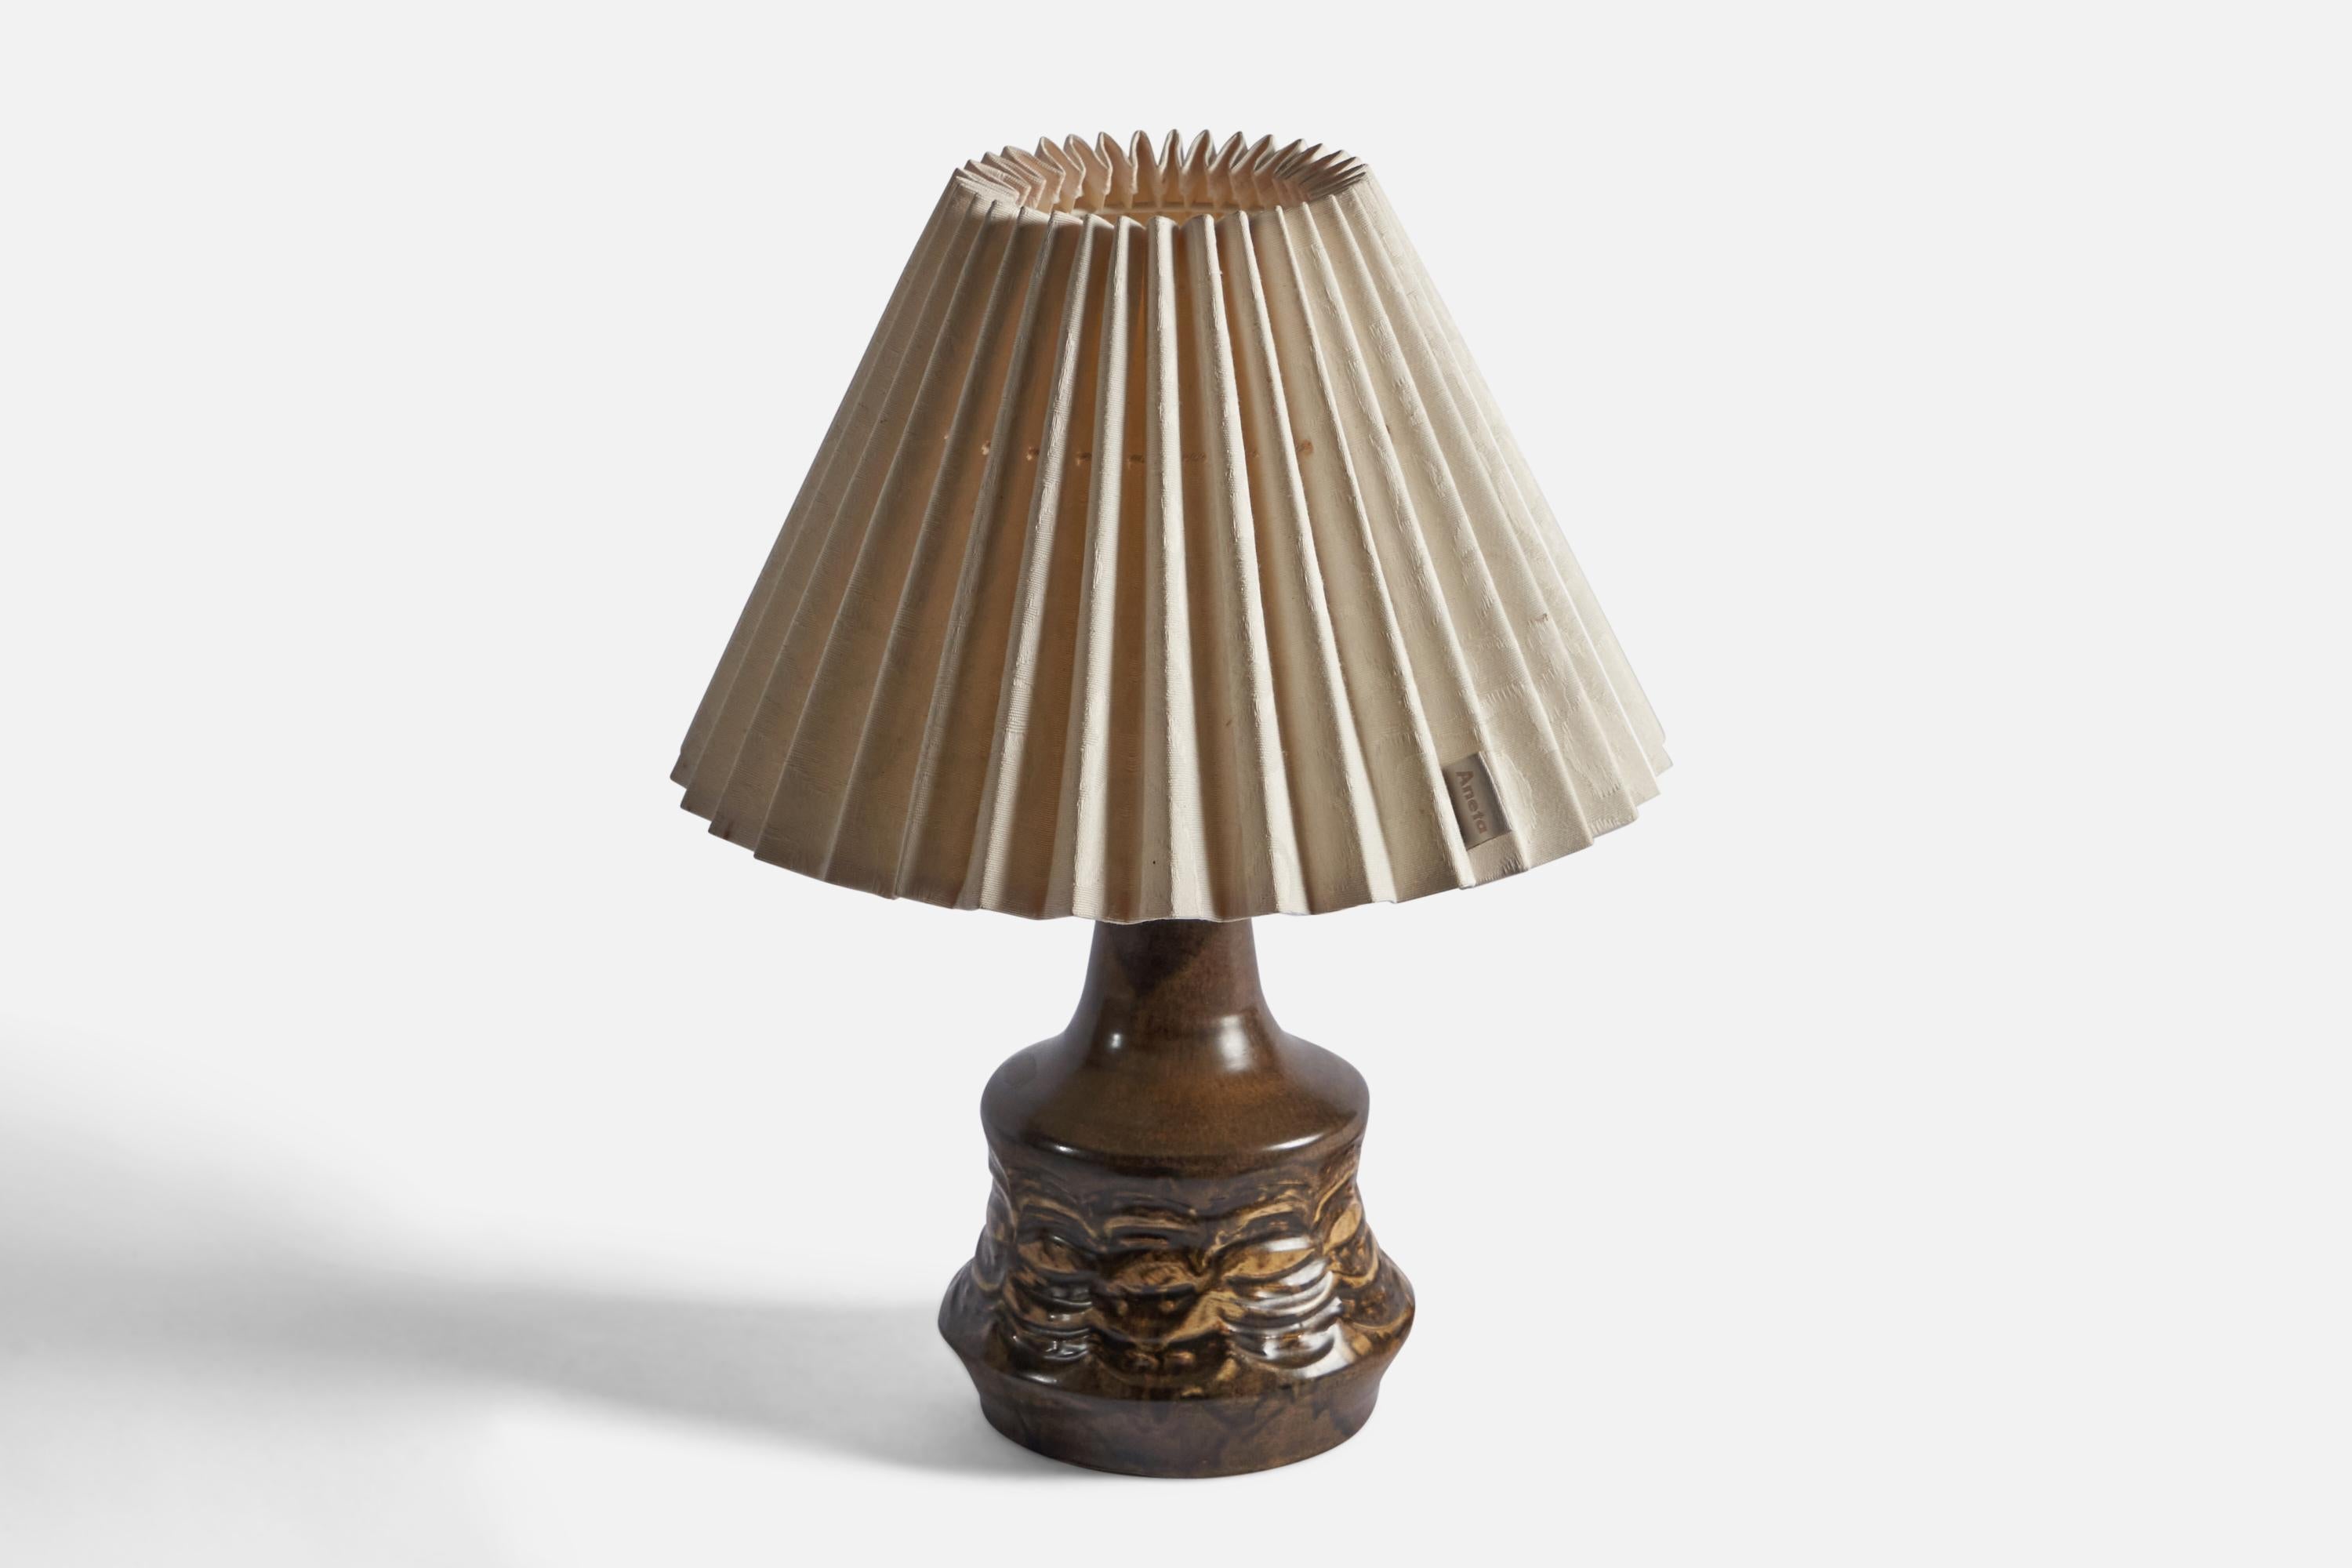 A brown-glazed stoneware table lamp designed and produced by Løvemose, Denmark, c. 1960s.

Overall Dimensions: 15.75